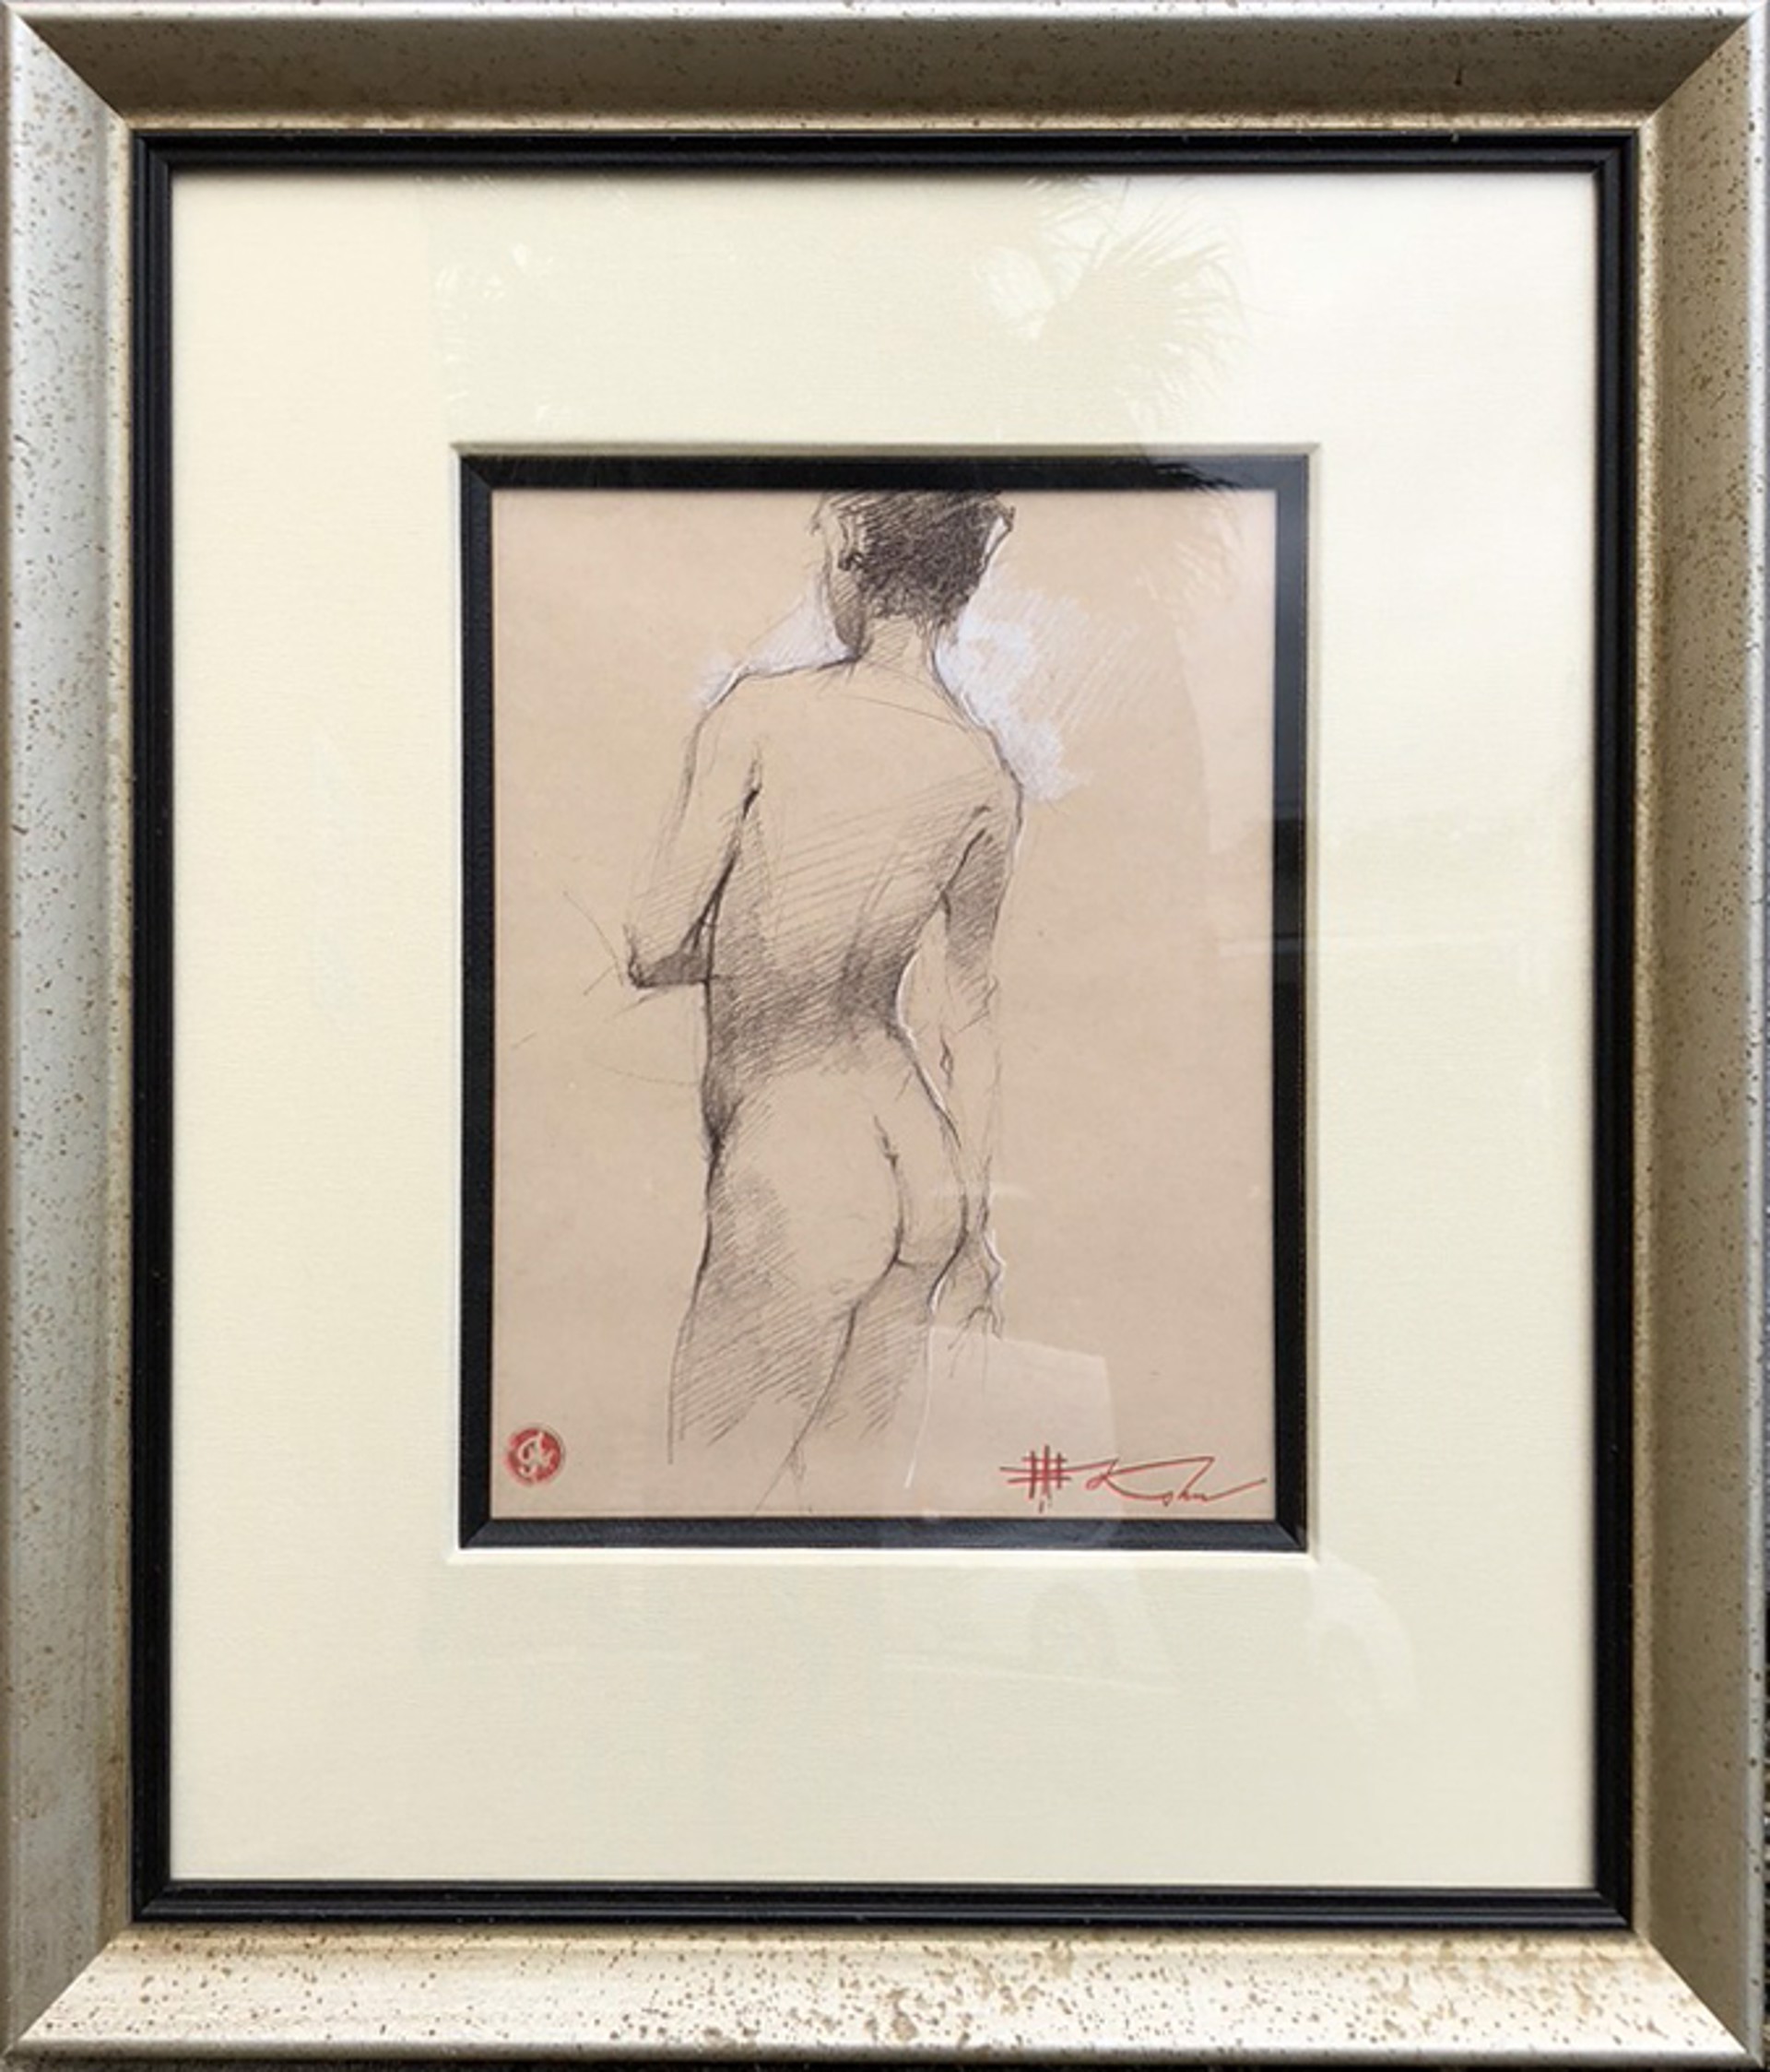 "Nude Study" by Andre Kohn